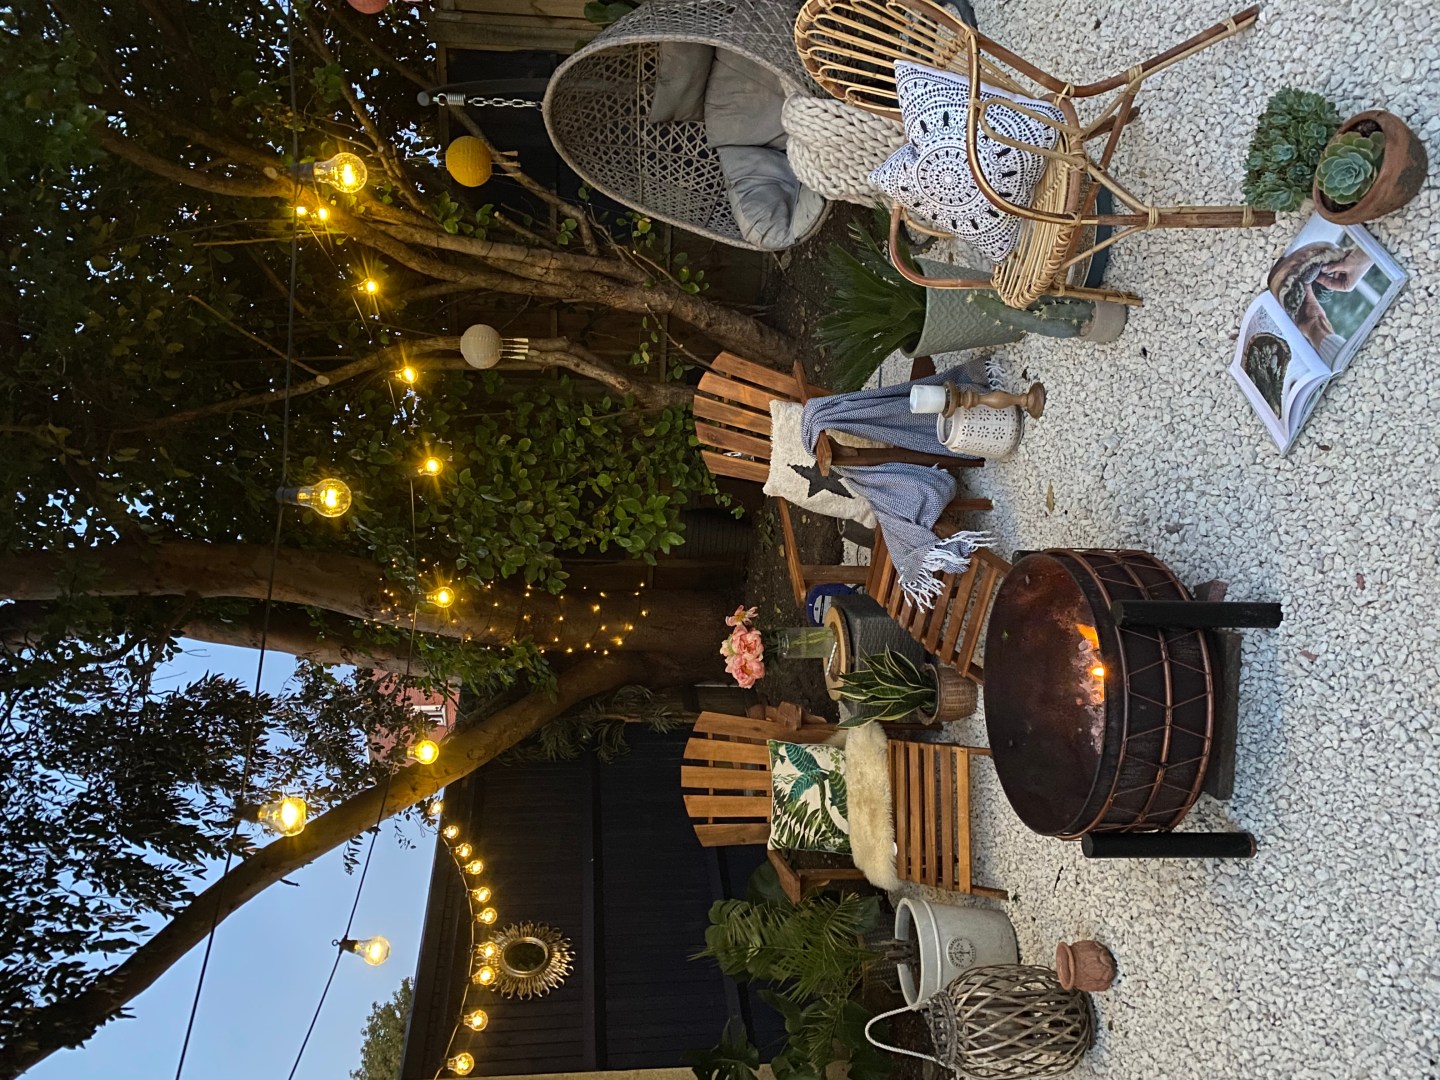 lighting and a fire pit on white gravel on a mediterranean inspired garden